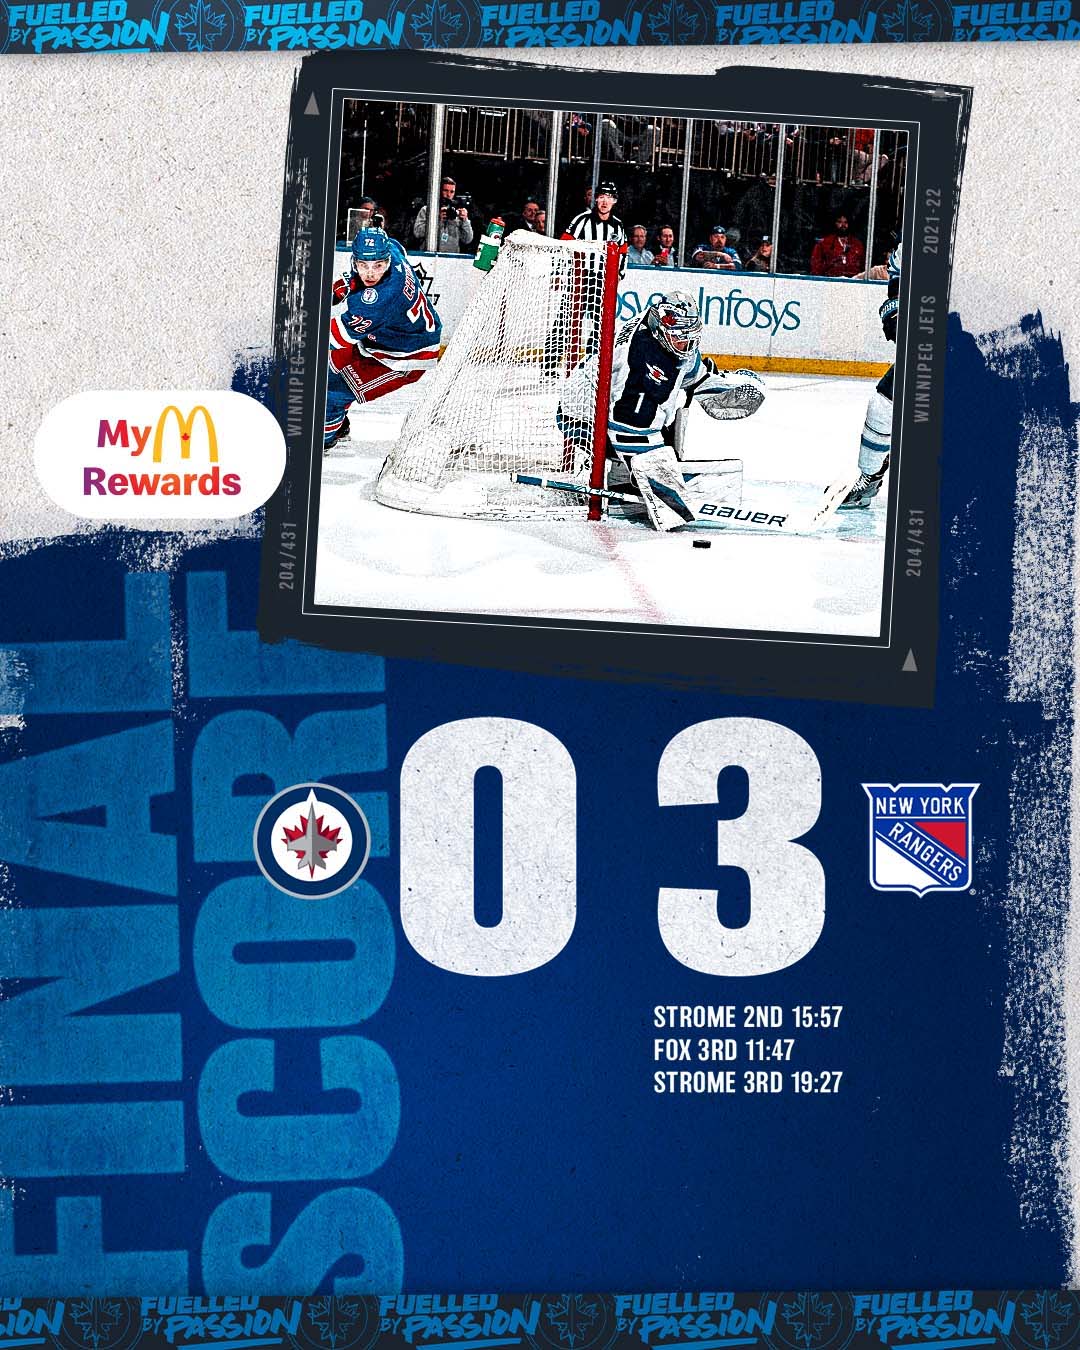 Couldn't find the back of the net in this one. Comrie stood tall making 32 saves...